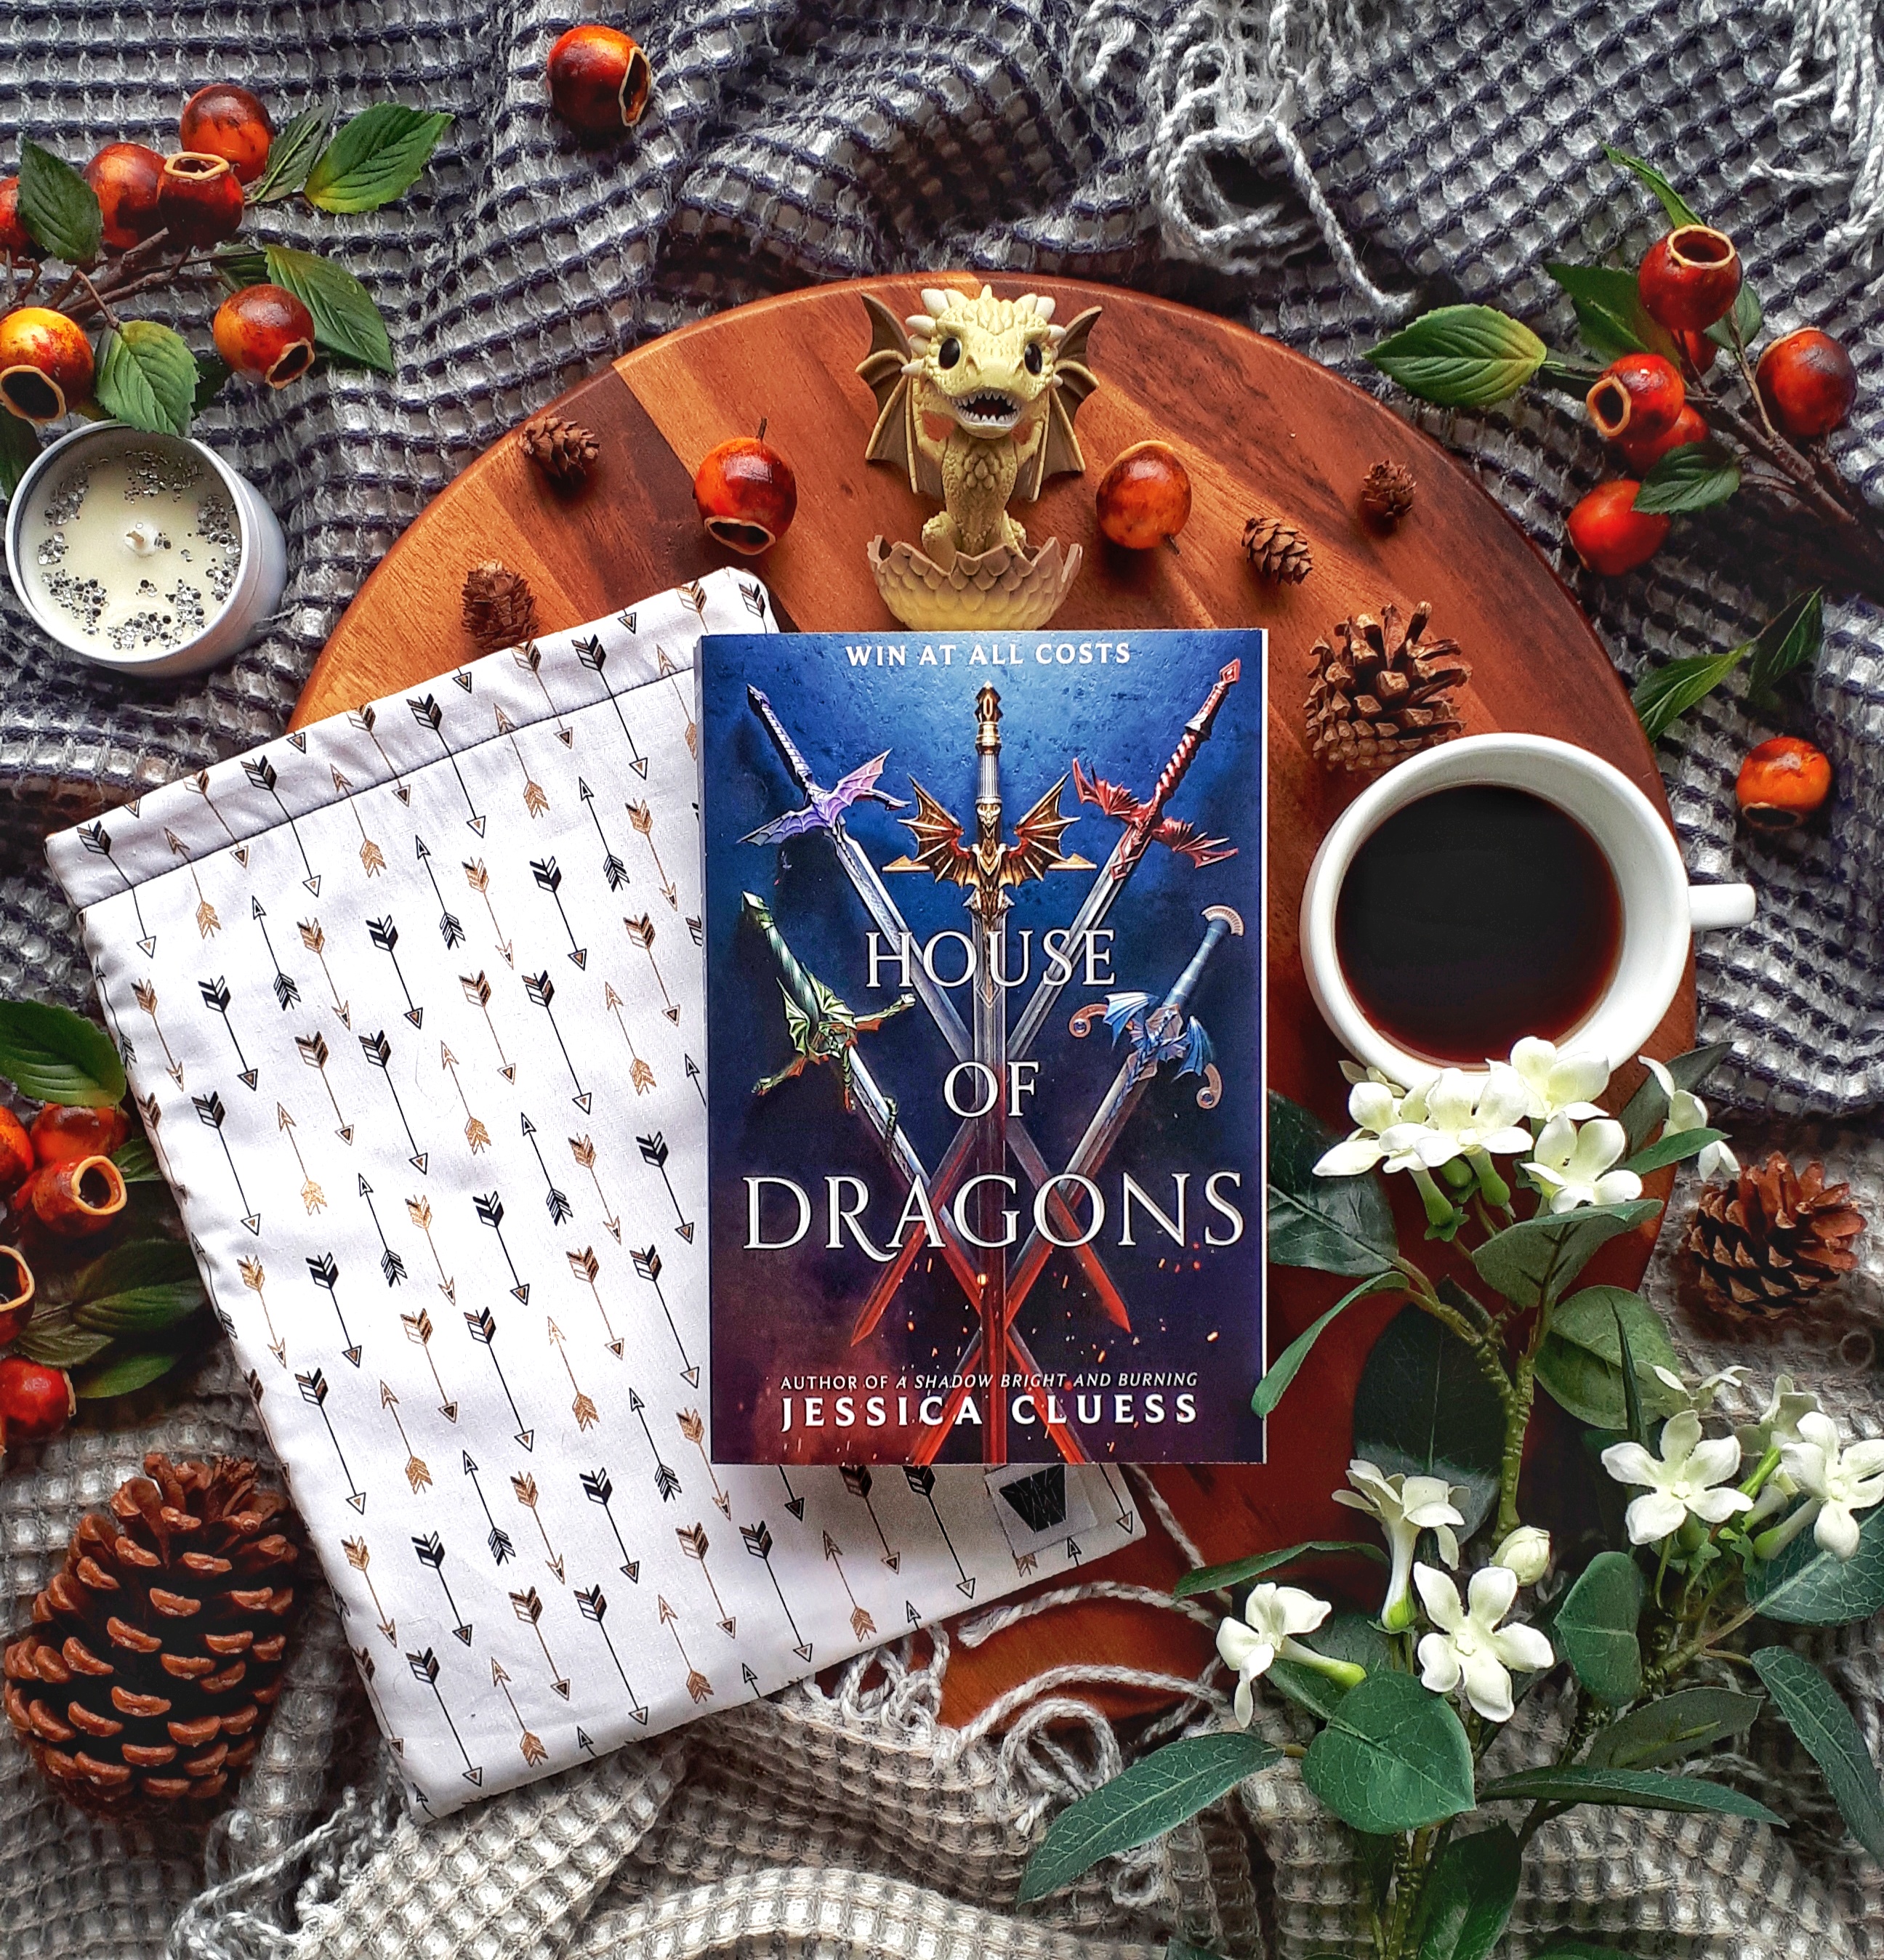 War of Dragons (House of Dragons, #2) by Jessica Cluess